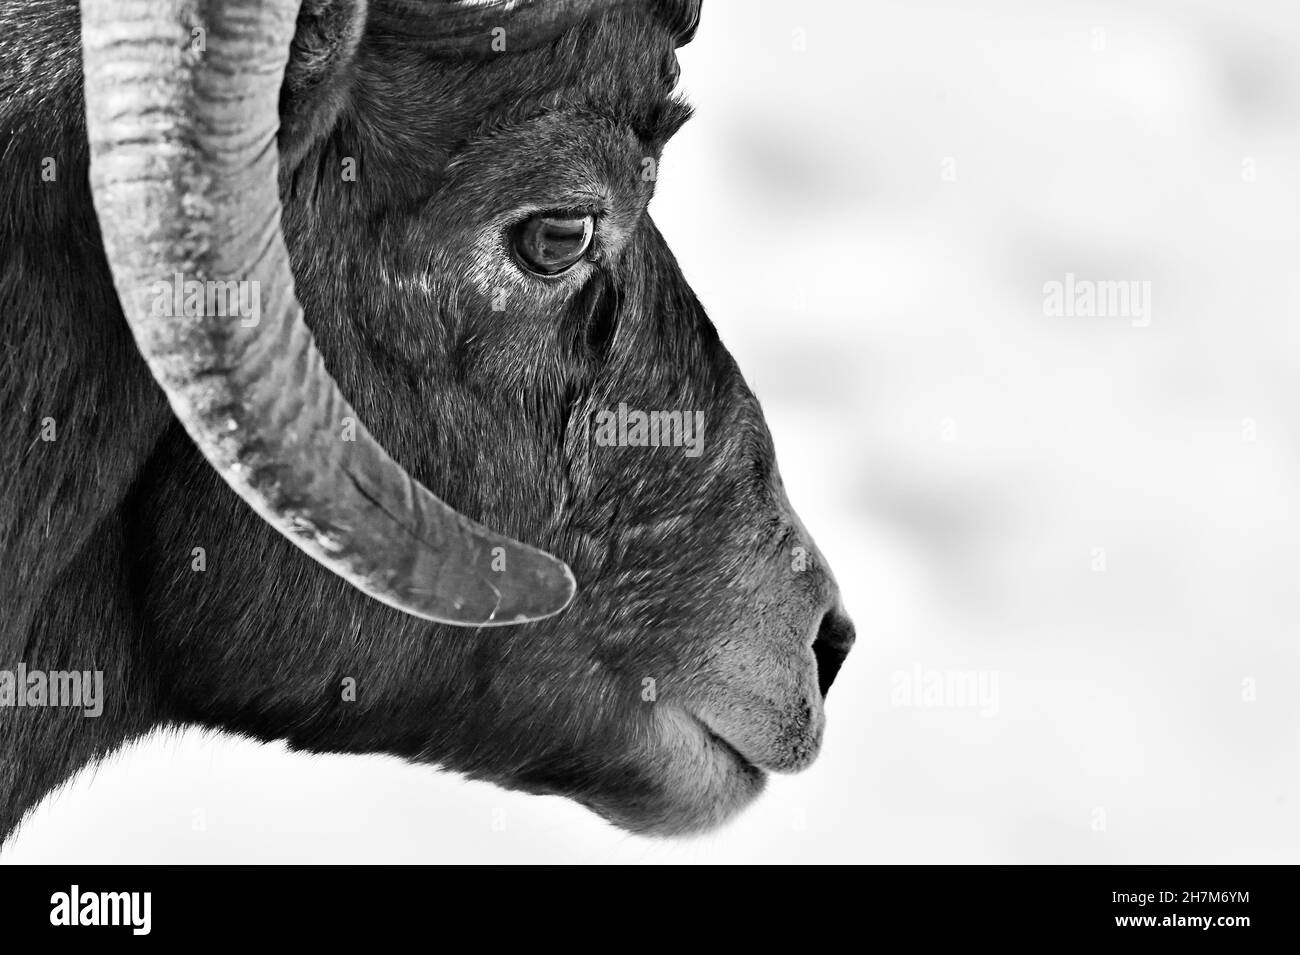 A close up portrait image of a wild rocky mountain bighorn sheep 'Orvis canadensis', black and white image. Stock Photo